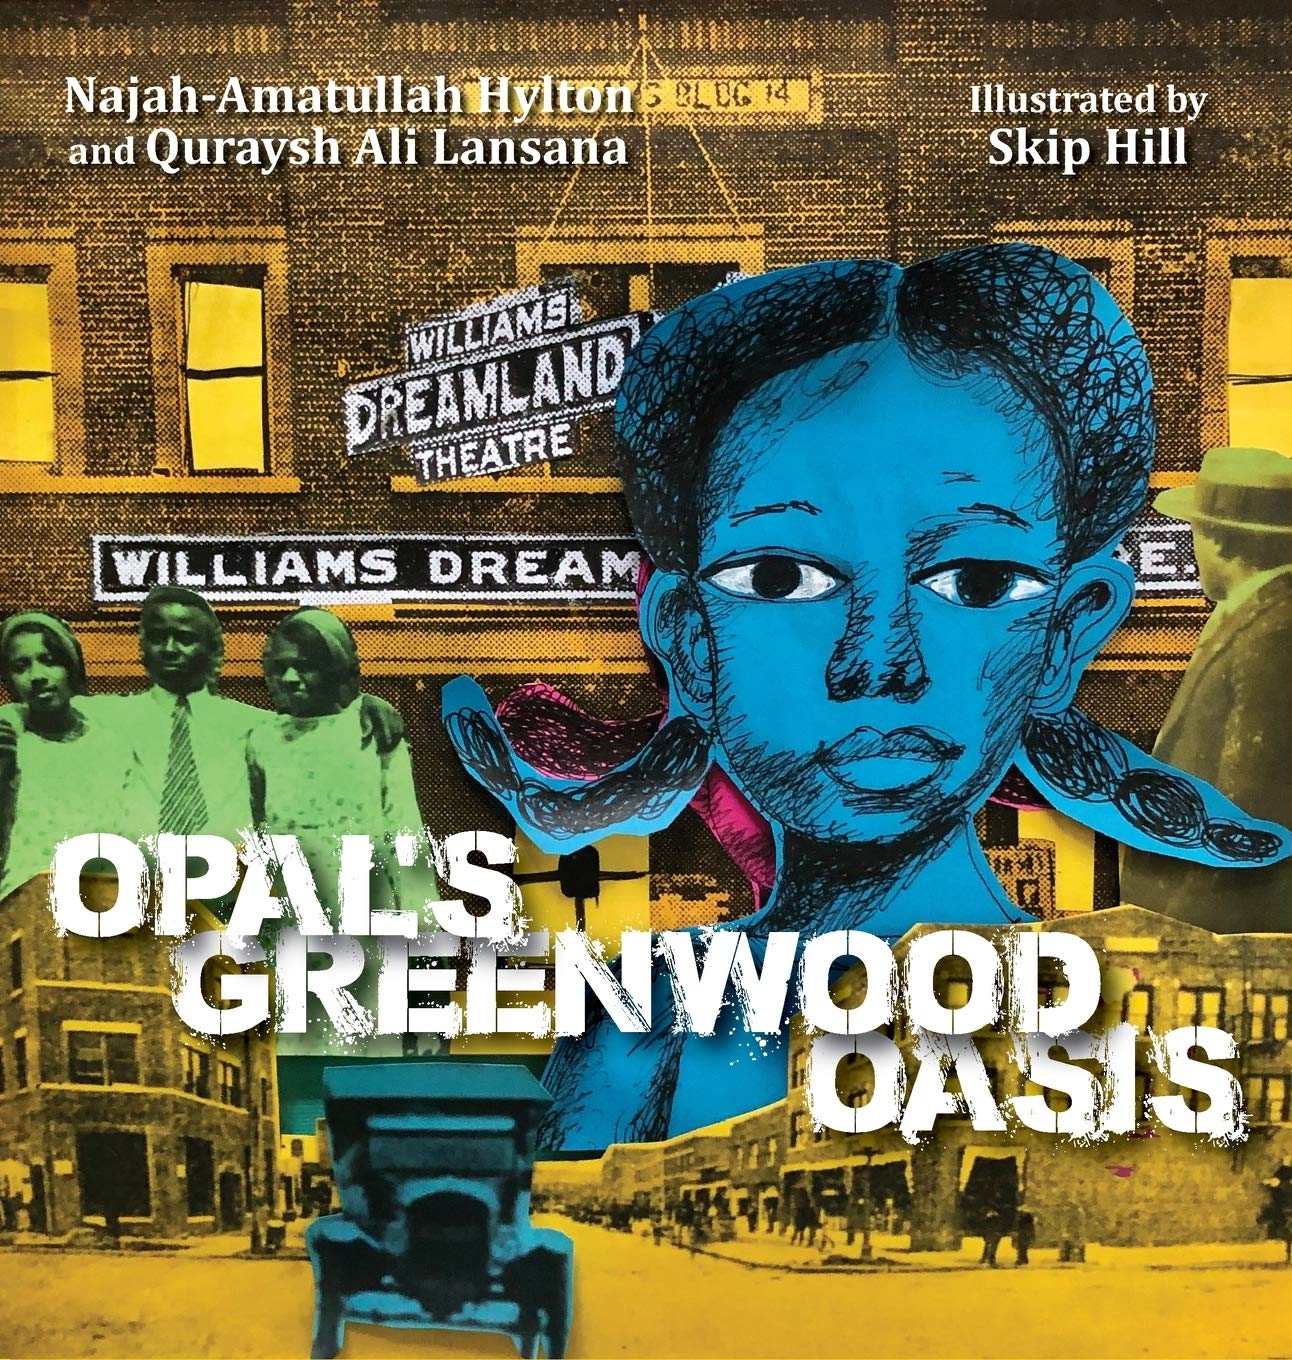 Resources to teach kids about the Tulsa Race Massacre: Opal's Greenwood Oasis is a beautiful children's book celebrating this community in Tulsa.